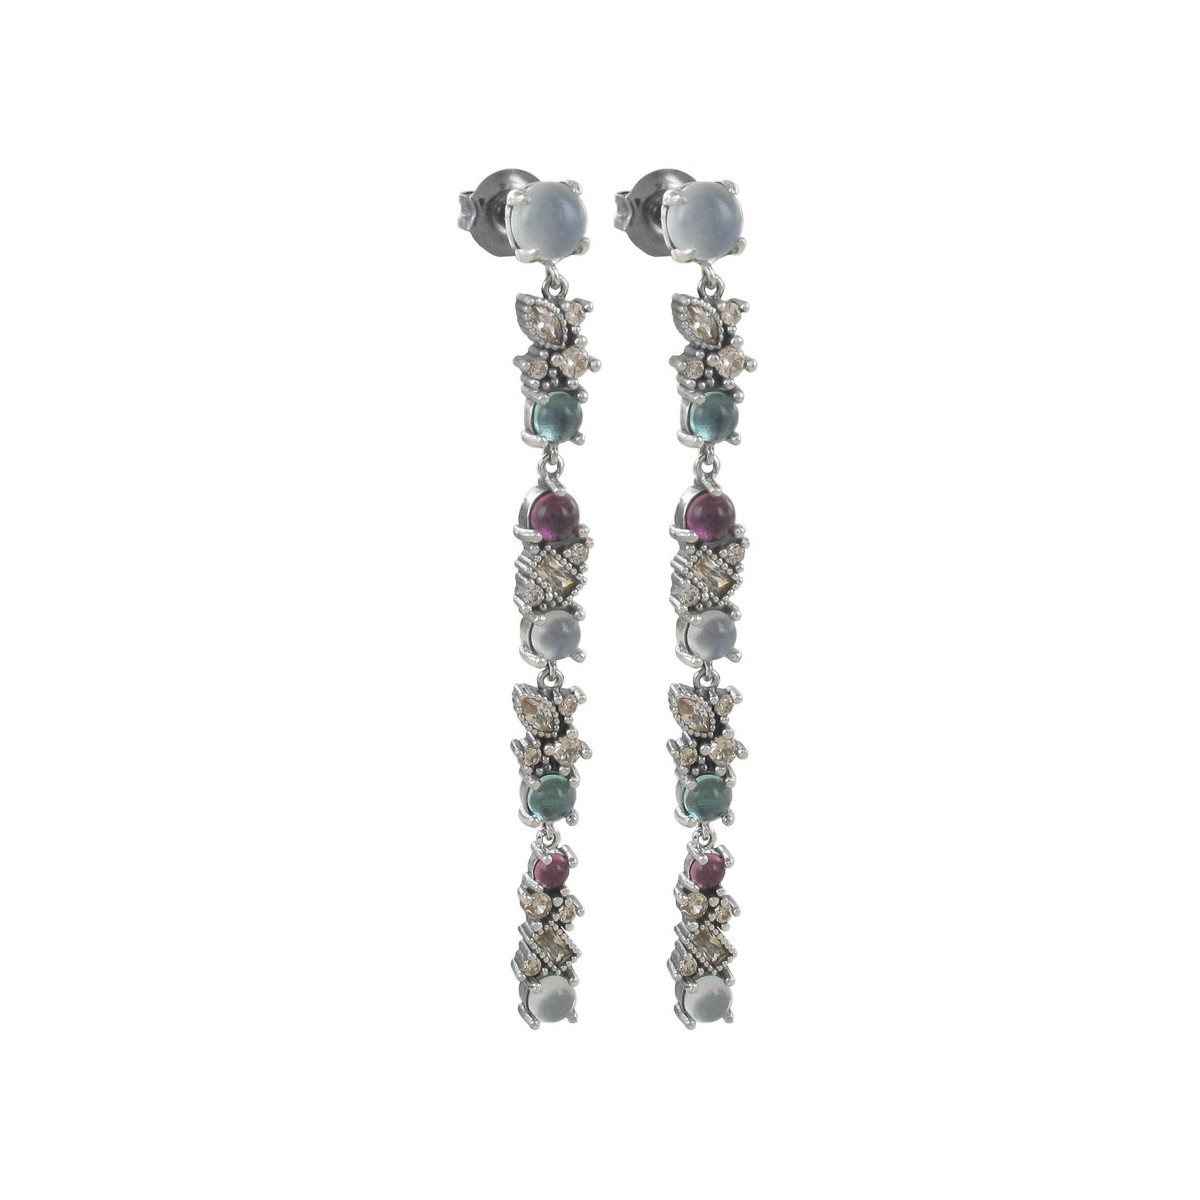 LONG EARRINGS WITH DIFFERENT STONES